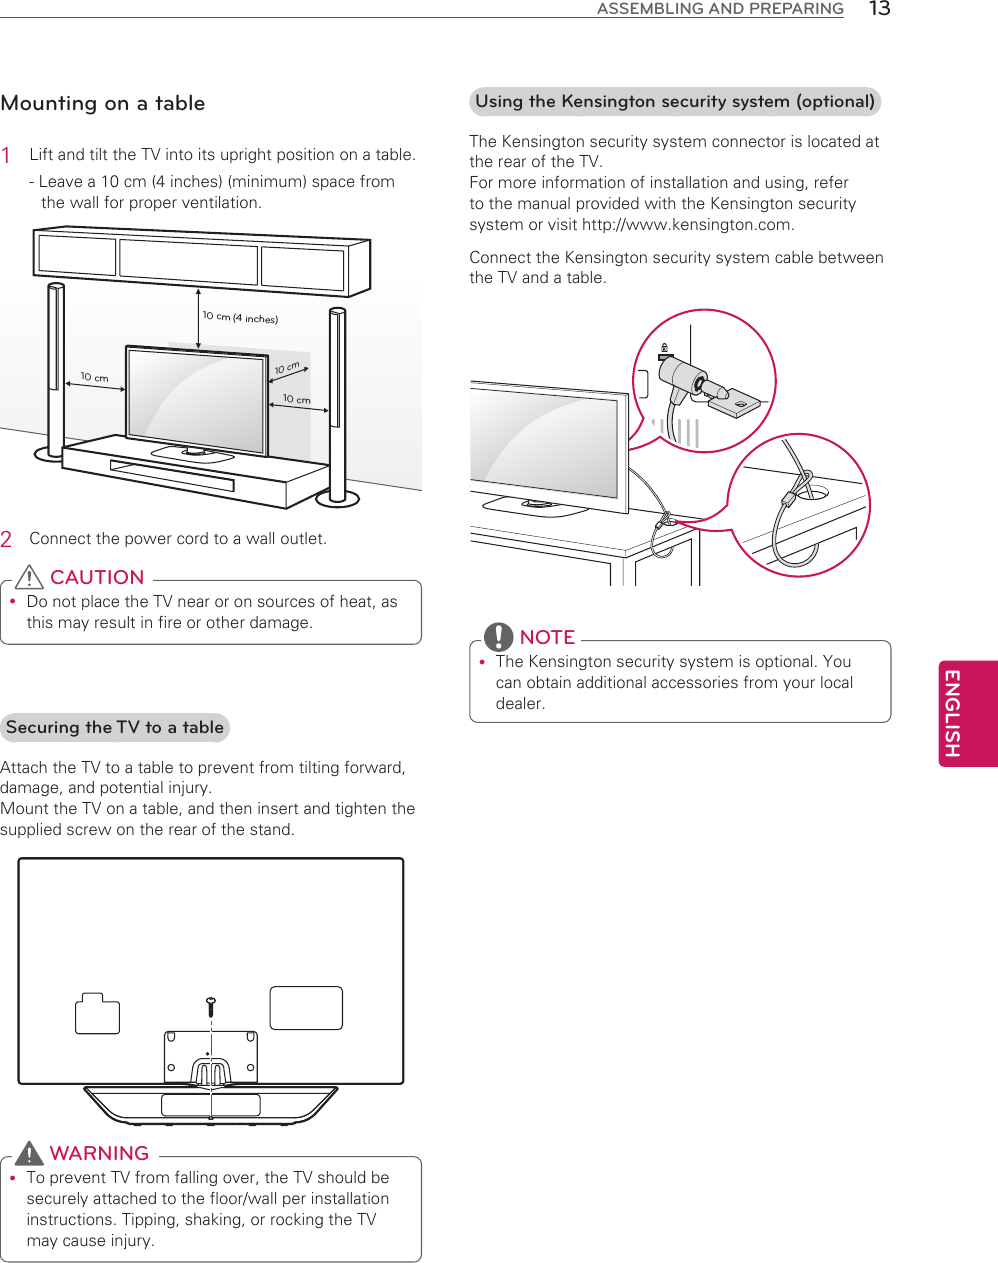 ENGLISH13ASSEMBLING AND PREPARINGMounting on a table1  Lift and tilt the TV into its upright position on a table.- Leave a 10 cm (4 inches) (minimum) space from the wall for proper ventilation.10 cm10 cm10 cm10 cm(4 inches)2  Connect the power cord to a wall outlet. Do not place the TV near or on sources of heat, as this may result in fire or other damage. CAUTIONUsing the Kensington security system (optional)The Kensington security system connector is located at the rear of the TV.  For more information of installation and using, refer to the manual provided with the Kensington security system or visit http://www.kensington.com.Connect the Kensington security system cable between the TV and a table. The Kensington security system is optional. You can obtain additional accessories from your local dealer. NOTESecuring the TV to a tableAttach the TV to a table to prevent from tilting forward, damage, and potential injury. Mount the TV on a table, and then insert and tighten the supplied screw on the rear of the stand. To prevent TV from falling over, the TV should be securely attached to the floor/wall per installation instructions. Tipping, shaking, or rocking the TV may cause injury. WARNING